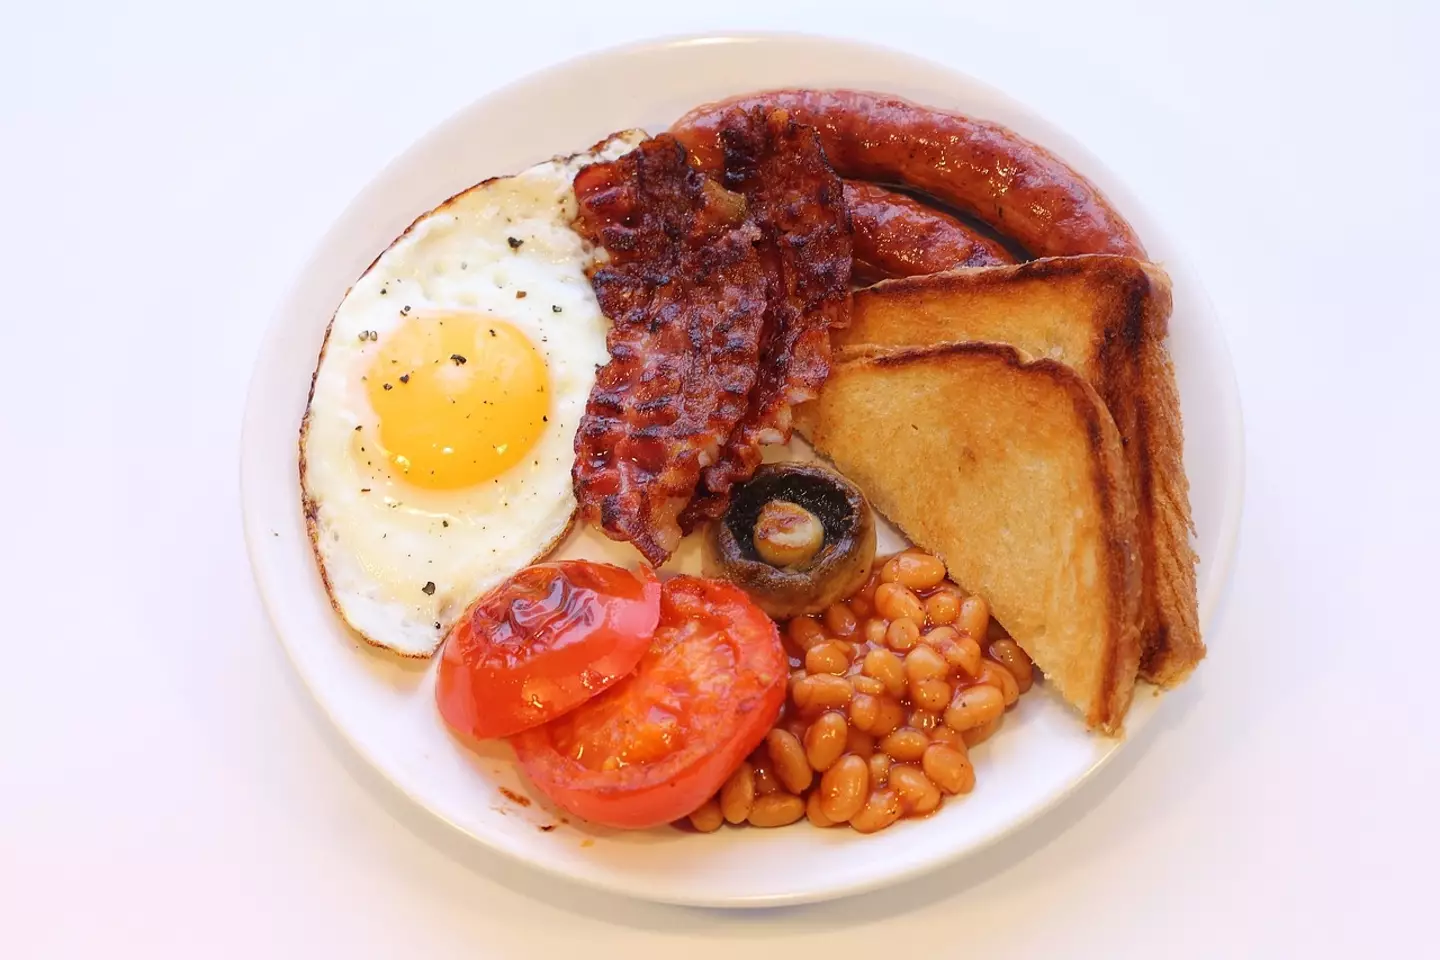 The English breakfast society spoke out against the inclusion of hash browns.